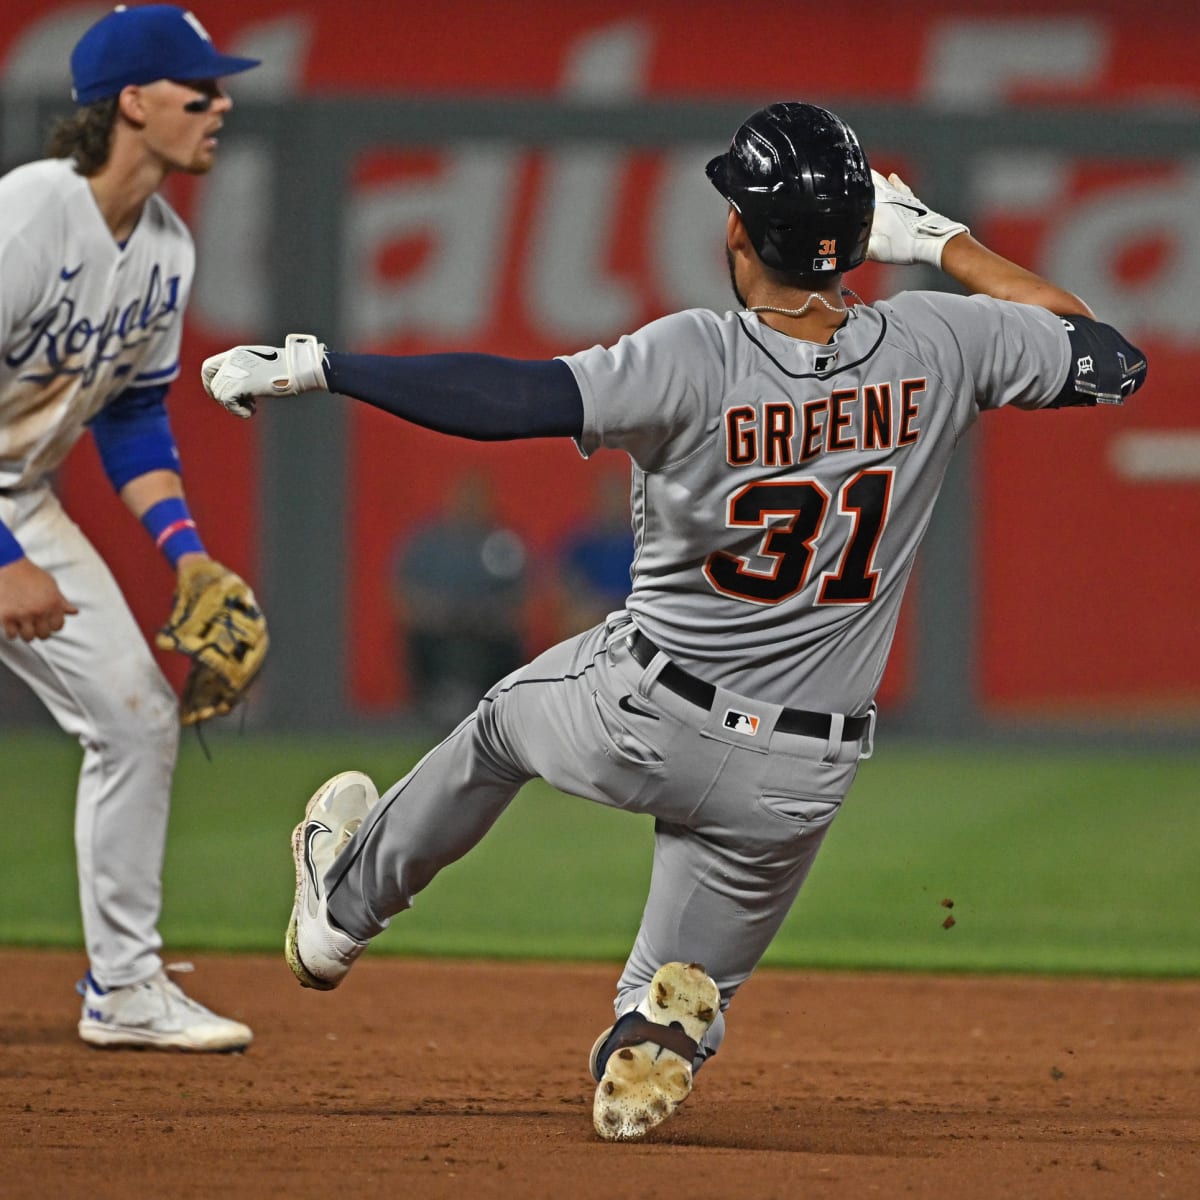 Riley Greene homers, but Tigers lose again to Guardians 